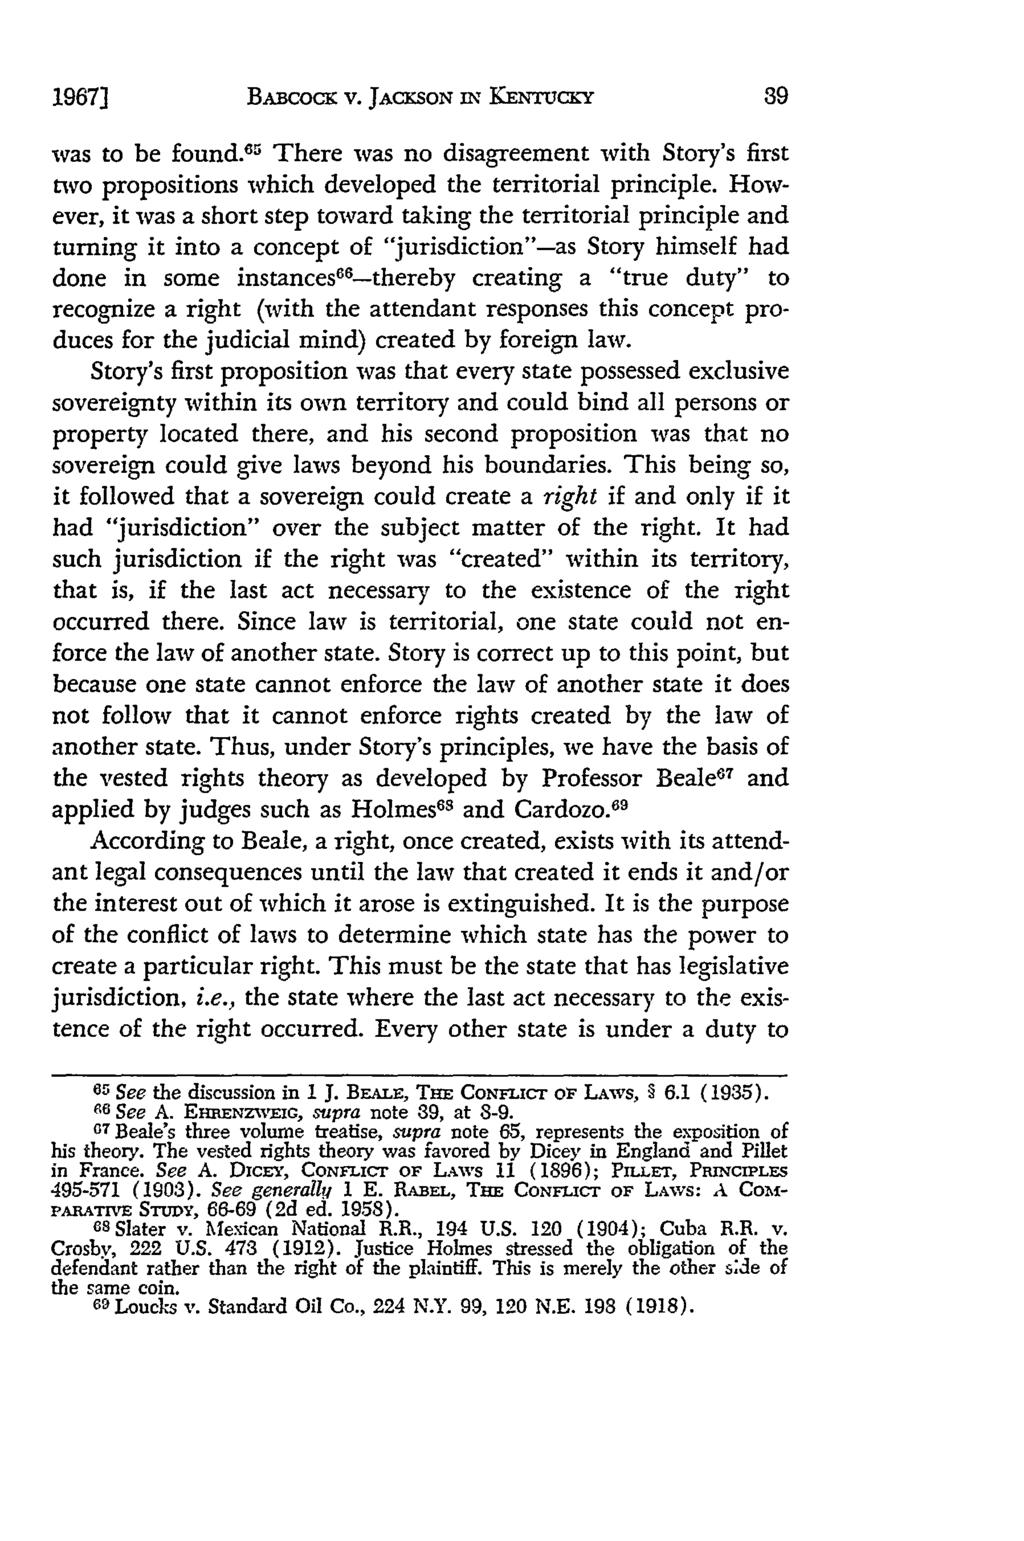 BAIcocK v. JAcKSON w KENTUCKY was to be found. 65 There was no disagreement with Story's first two propositions which developed the territorial principle.